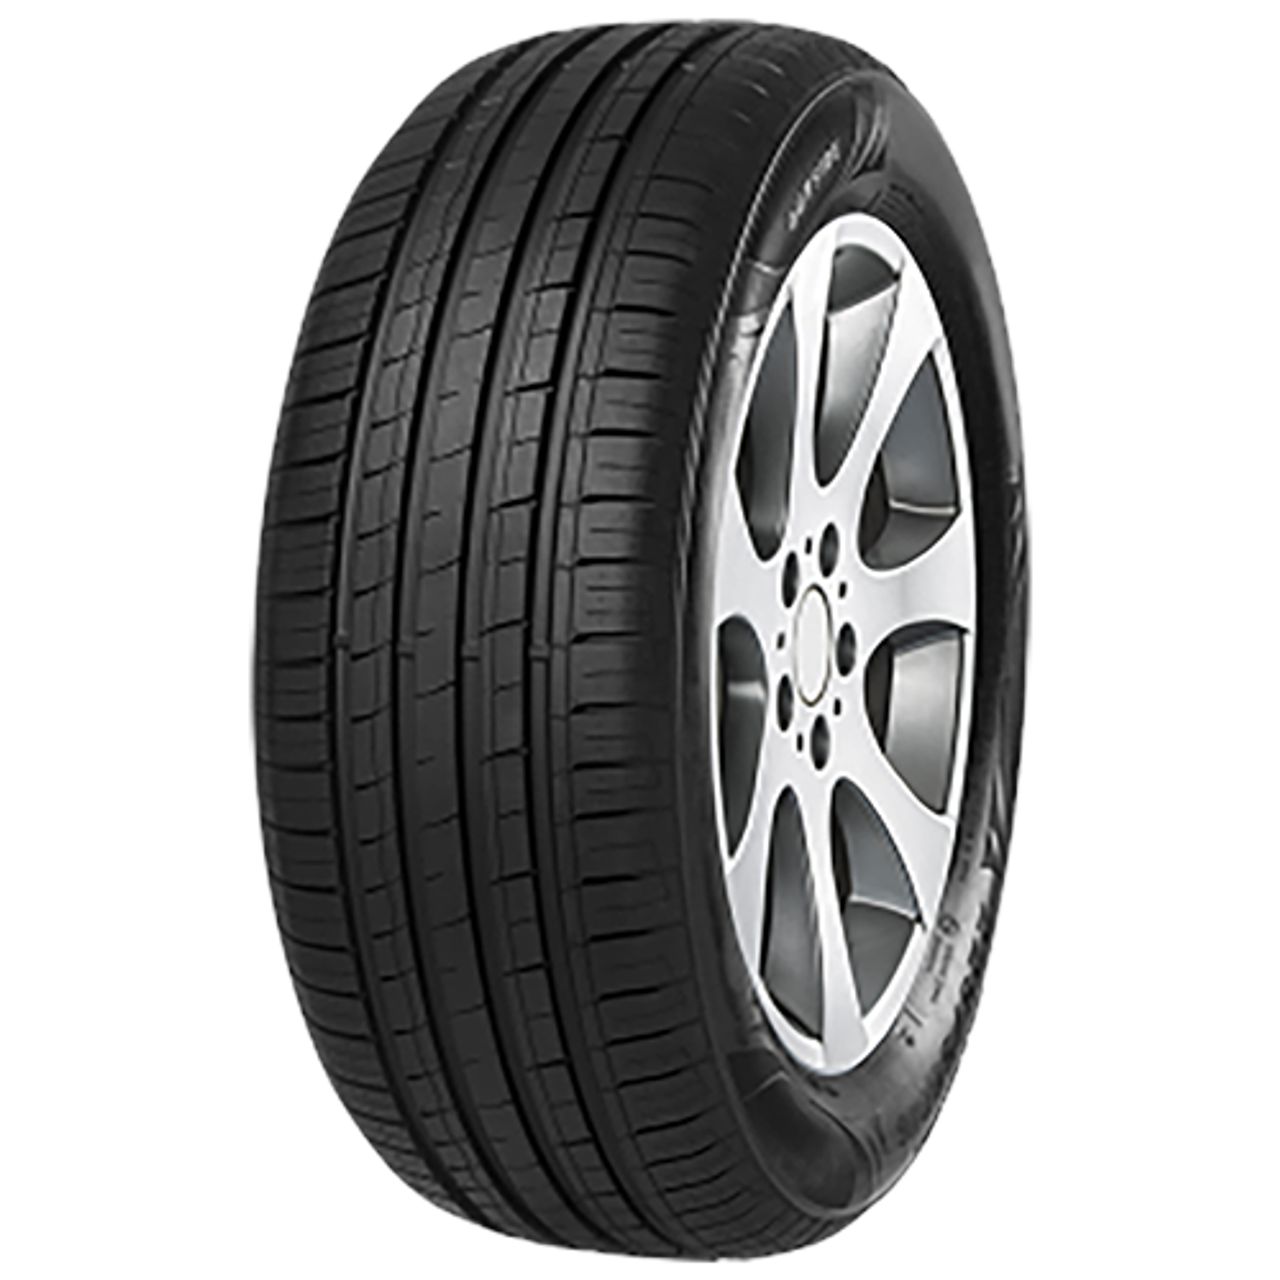 IMPERIAL ECODRIVER 5 205/70R15 96T